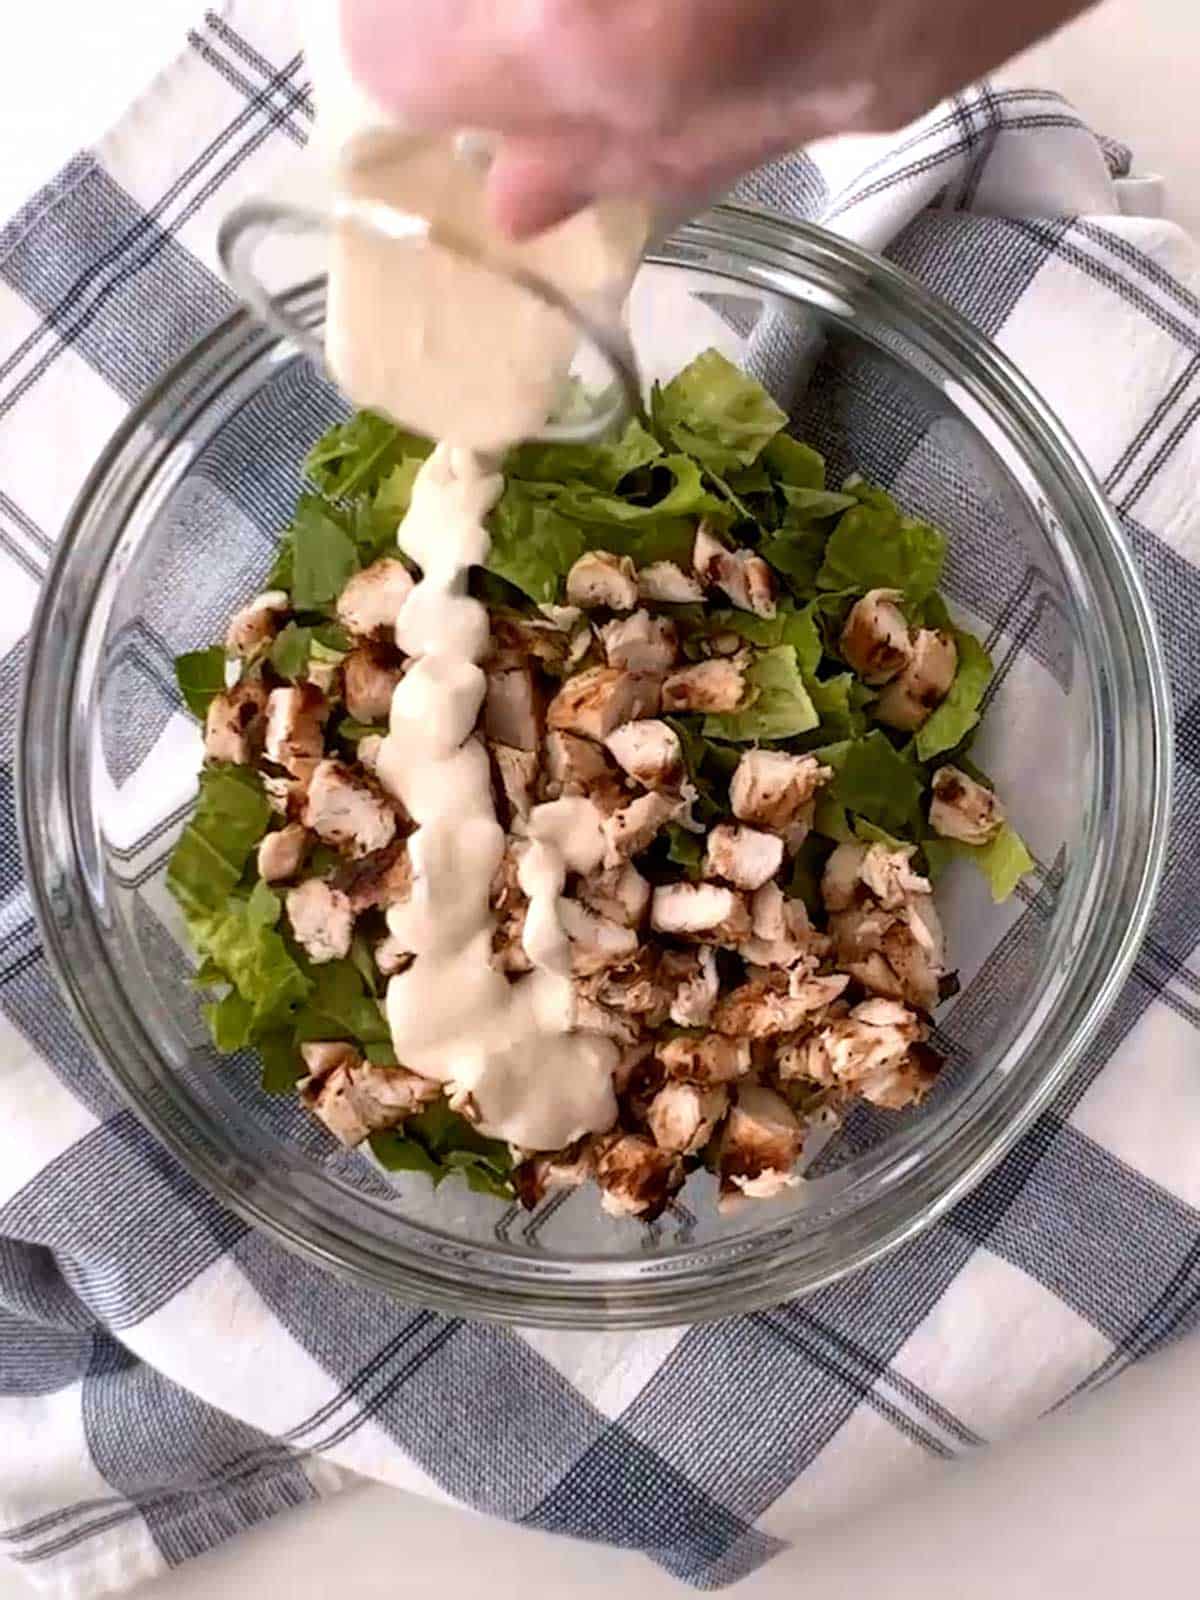 Adding dressing to Romaine lettuce and chicken.